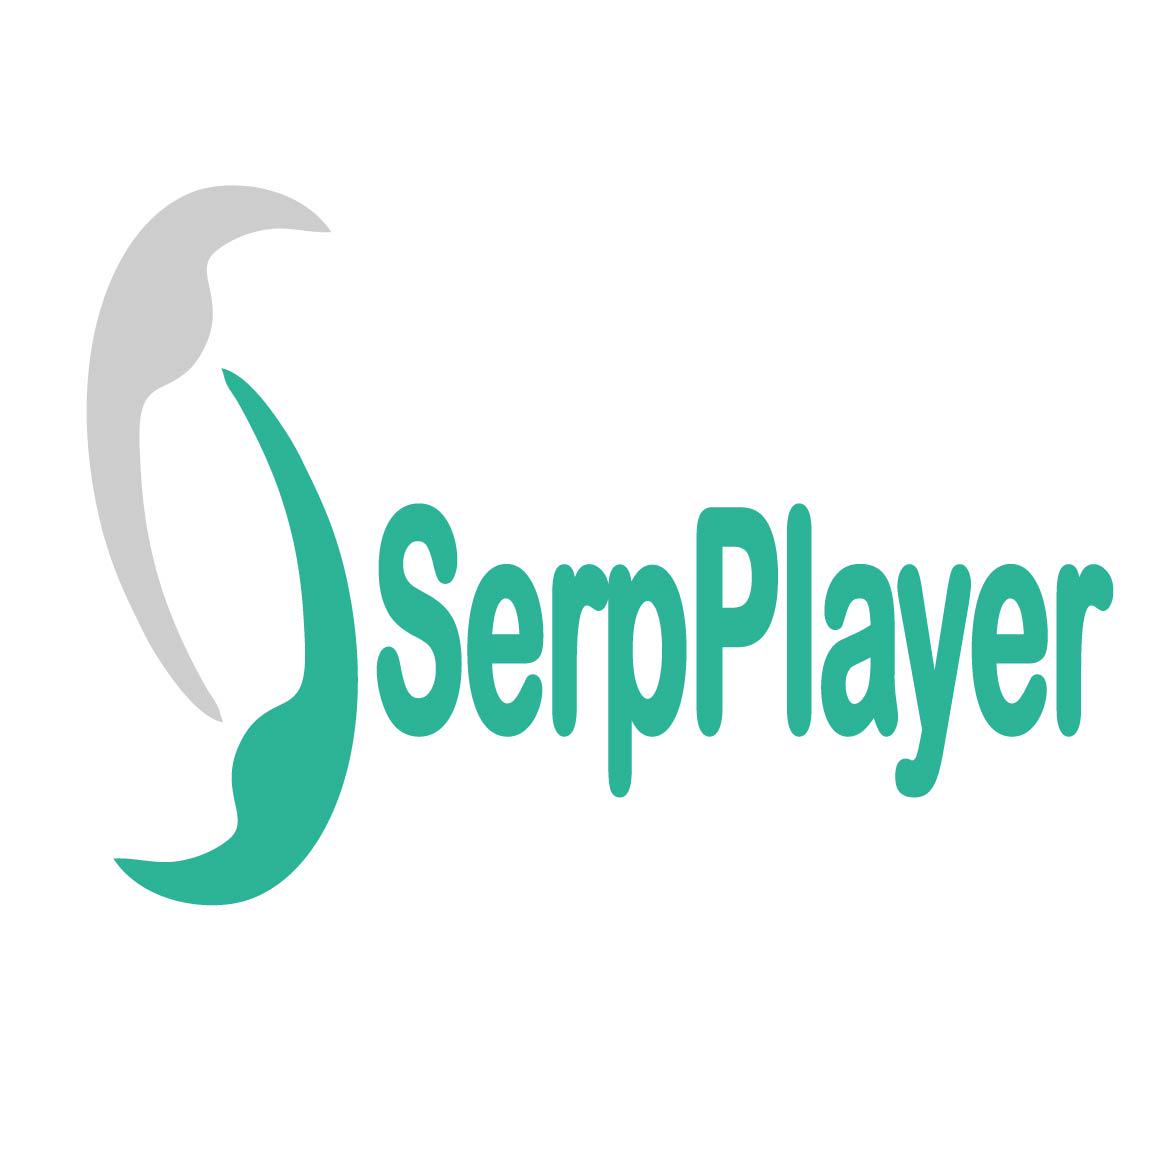 SerpPlayer profile on Qualified.One